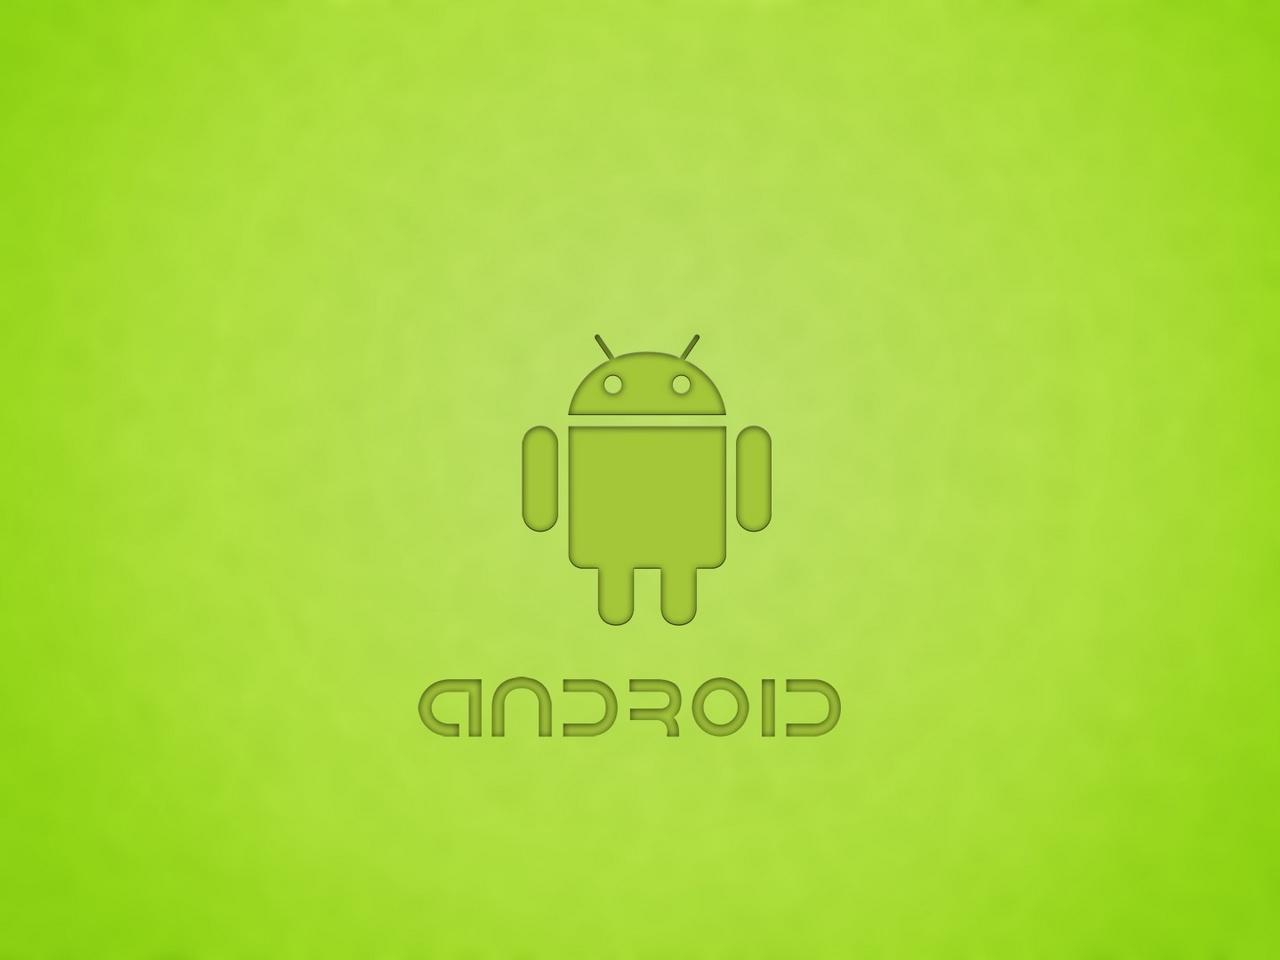 Download wallpaper 1280x960 android, green, robot, os standard 4:3